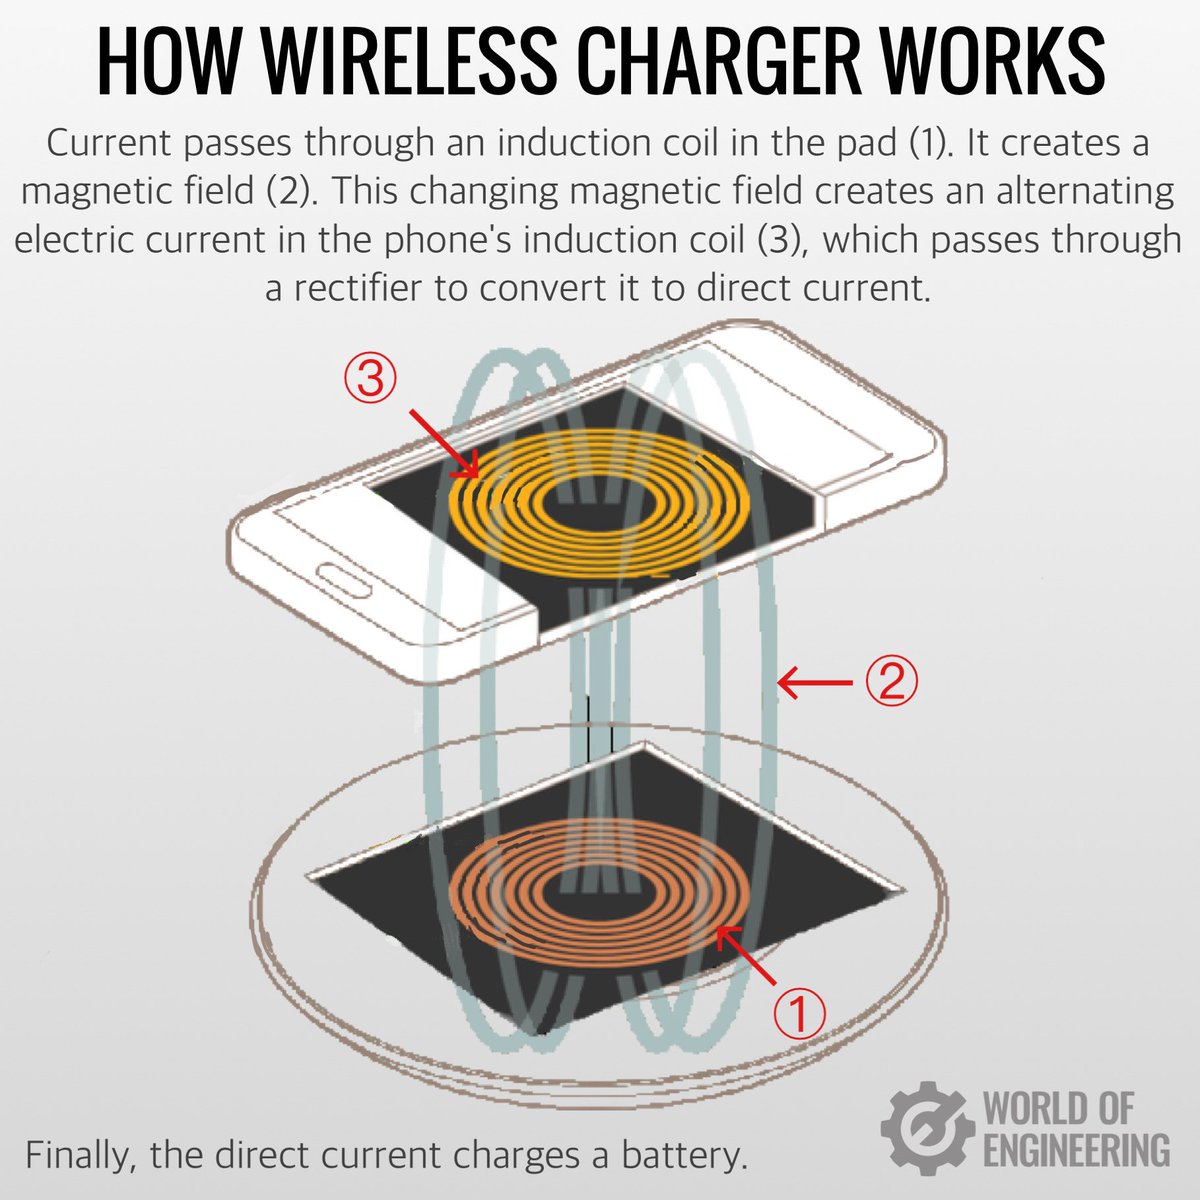 How inductive wireless charging works.